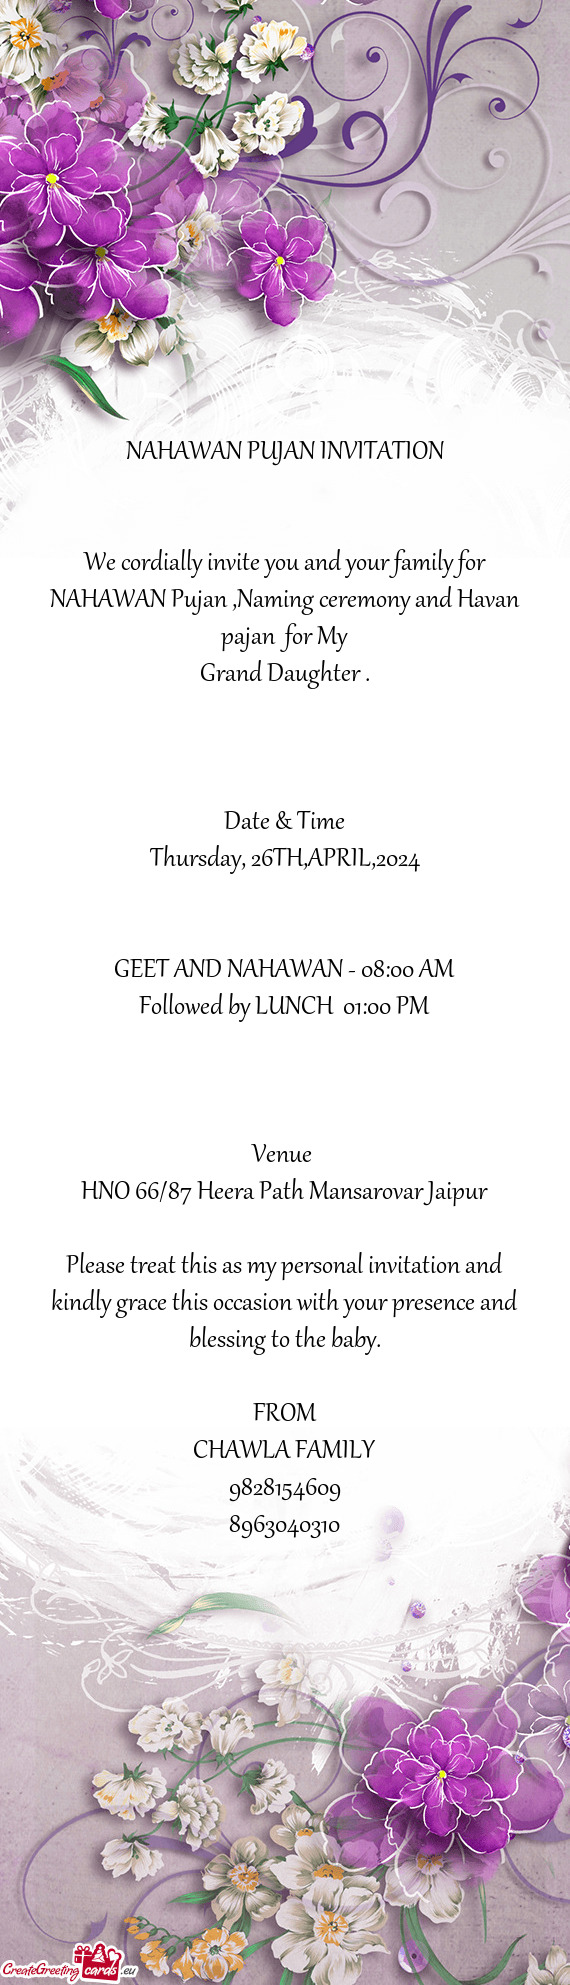 We cordially invite you and your family for NAHAWAN Pujan ,Naming ceremony and Havan pajan for My